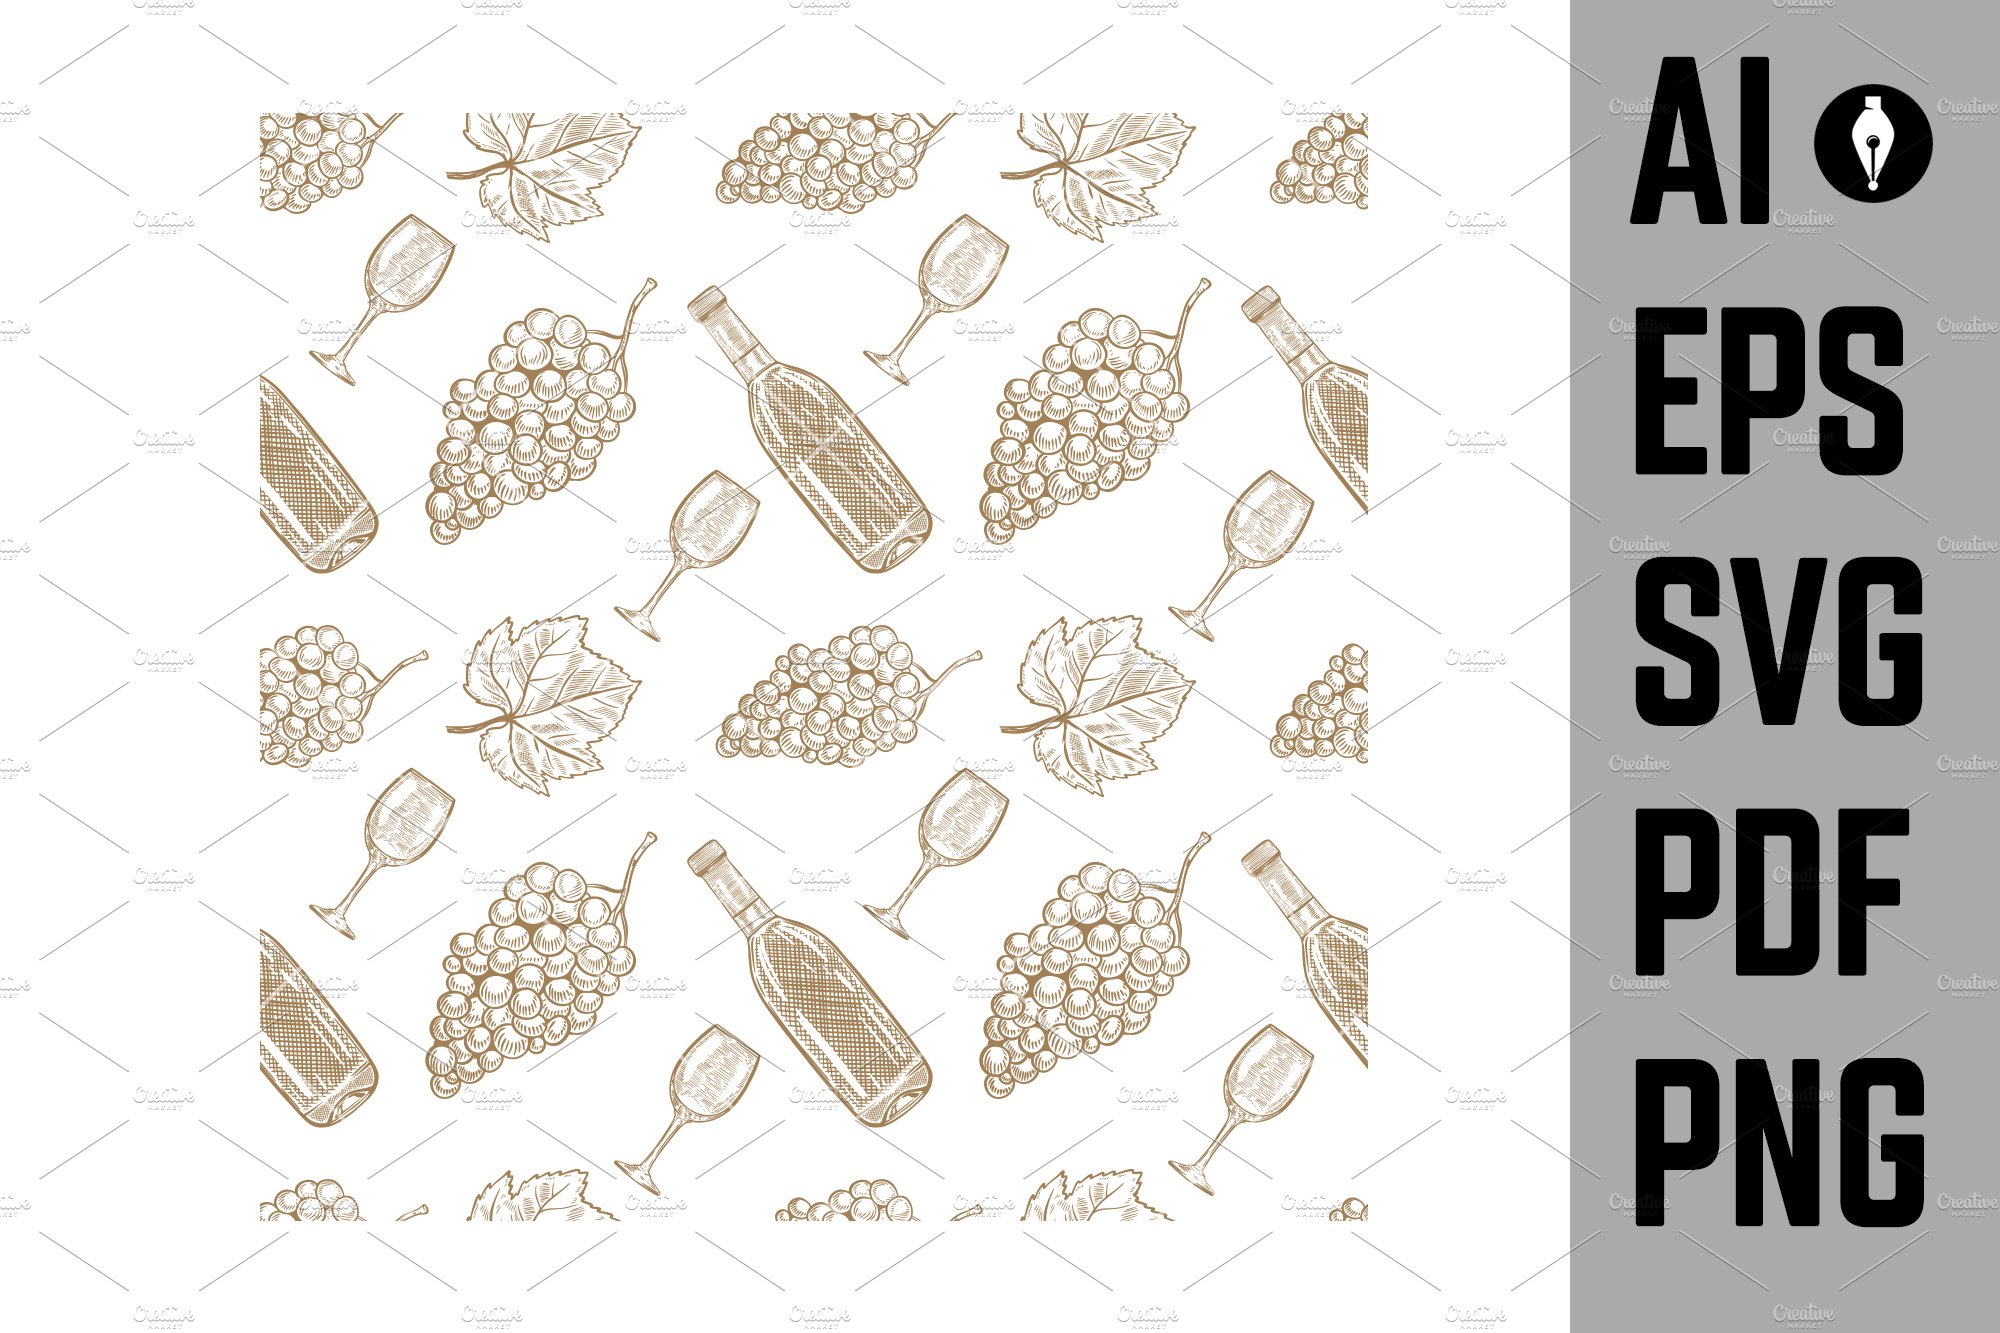 Seamless pattern with wine bottles cover image.